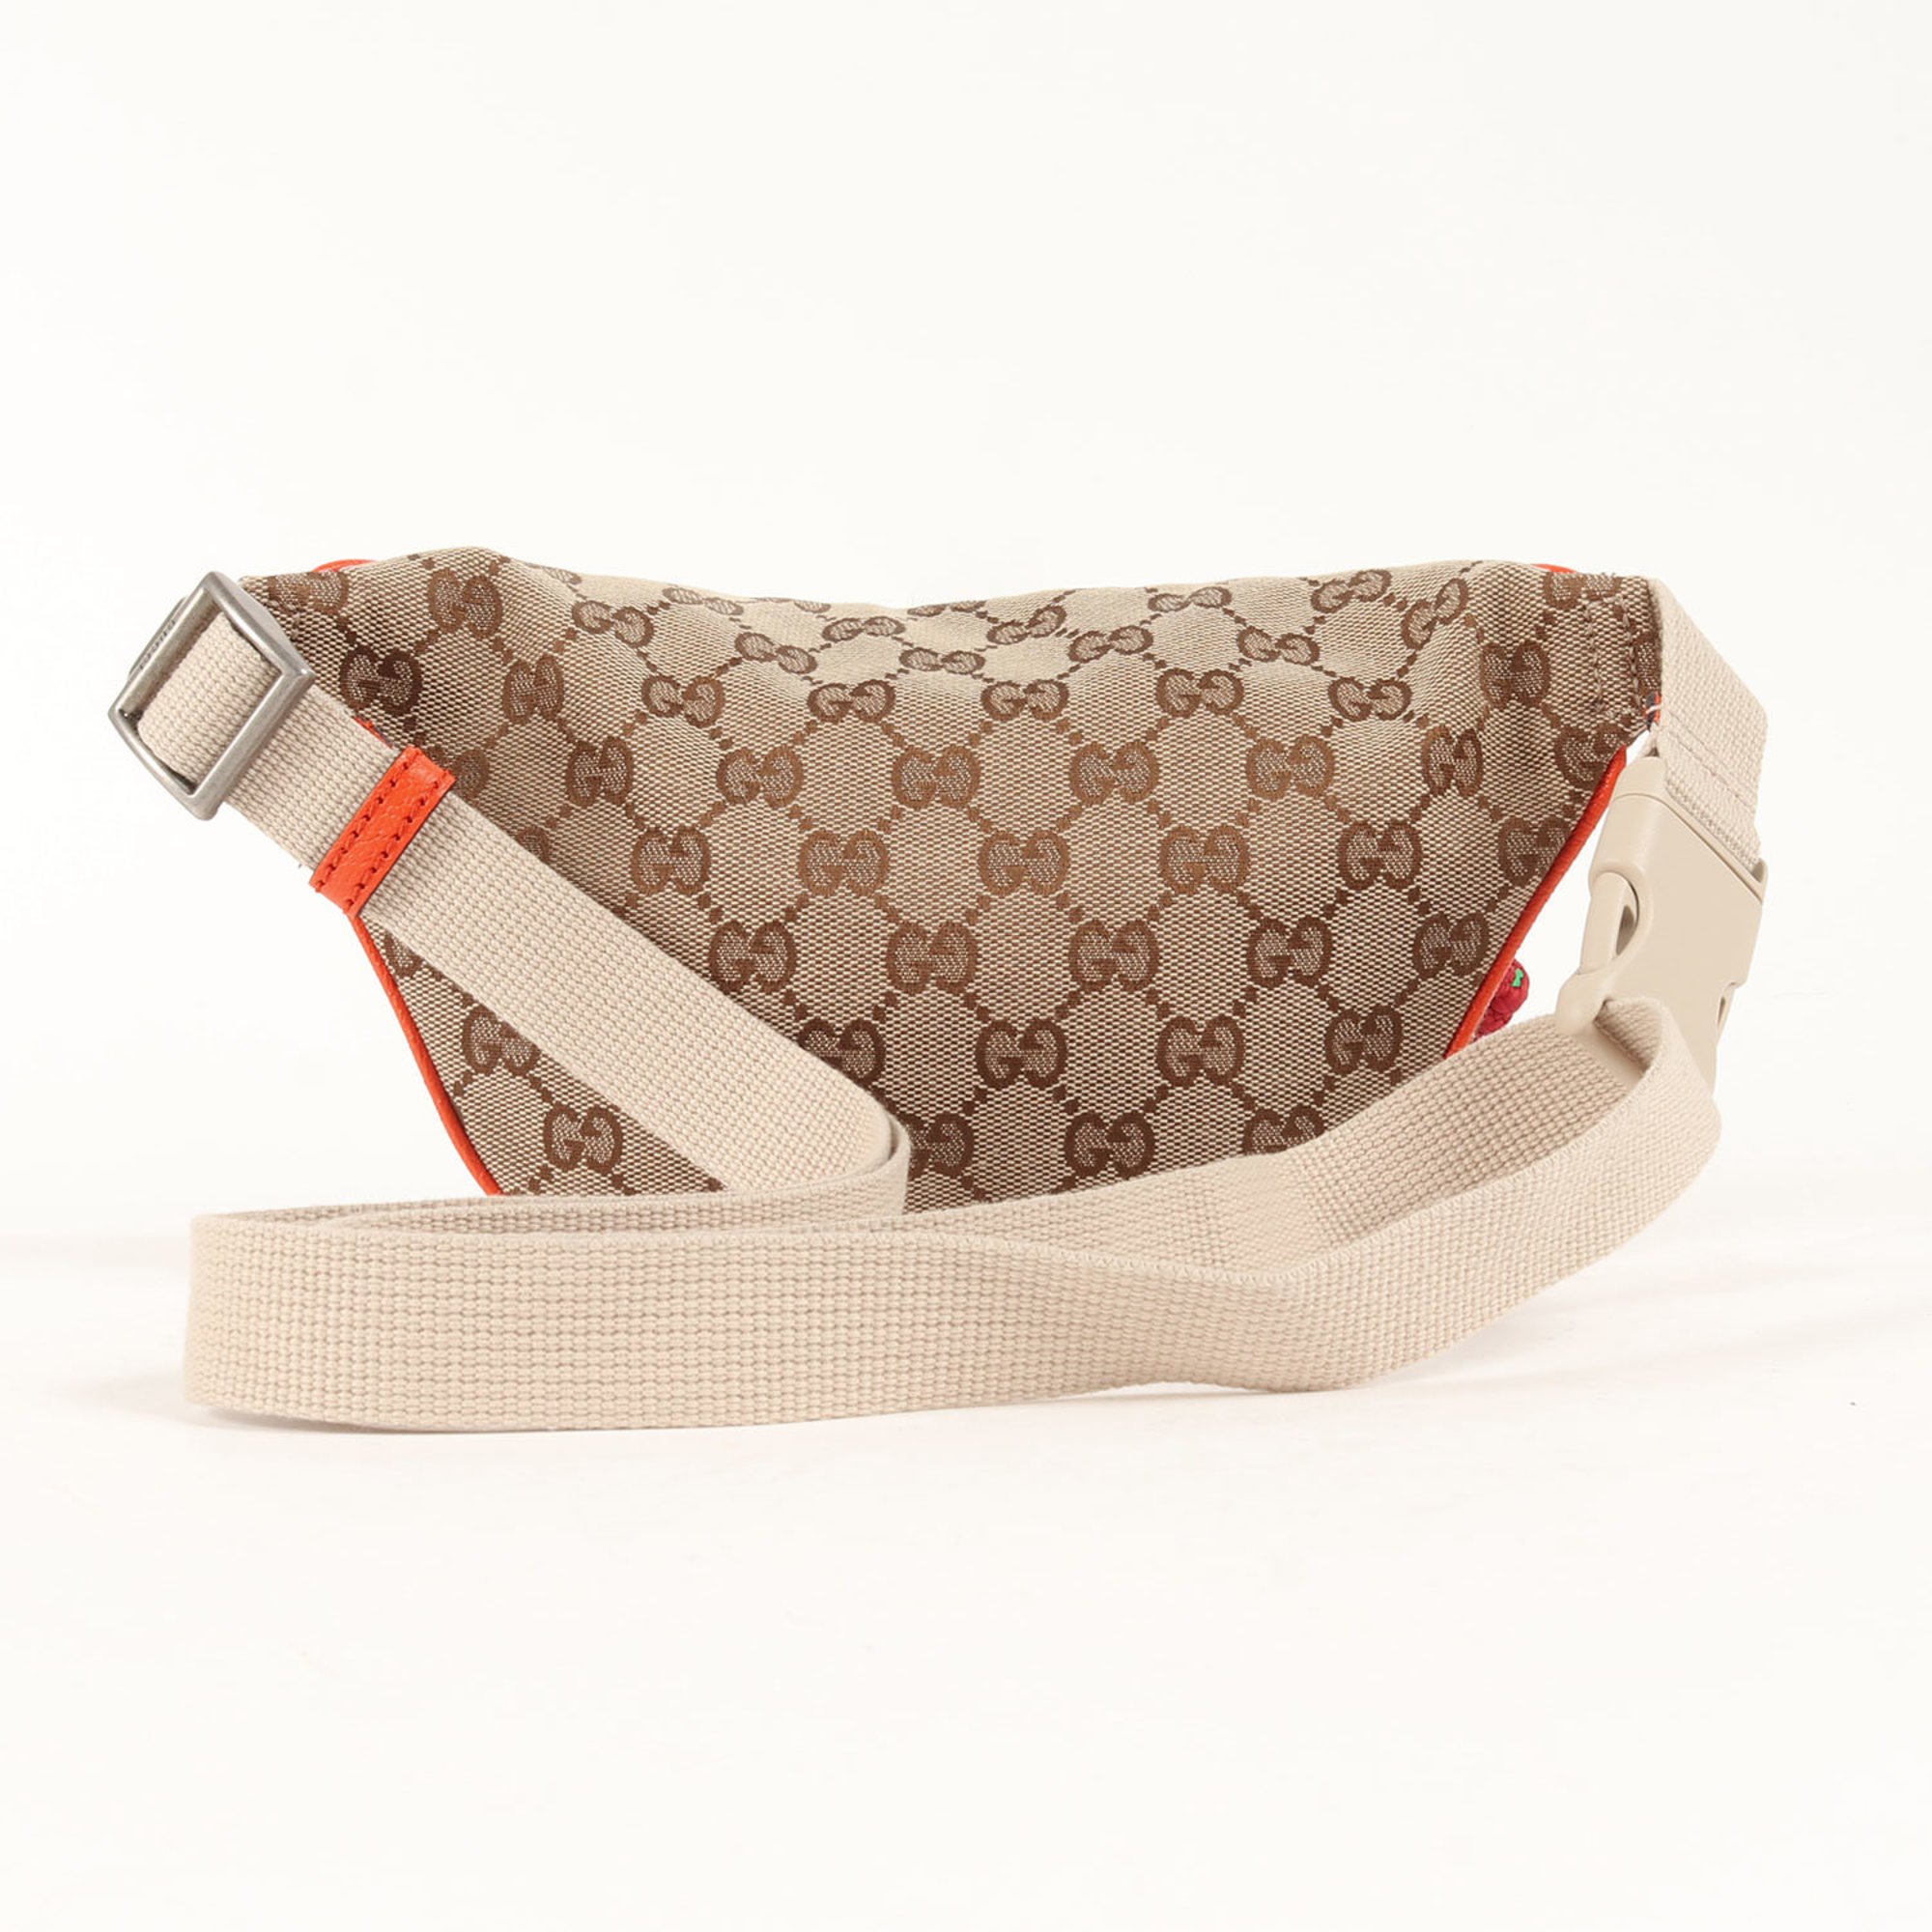 GUCCI Gucci Bag 21AW THE NORTH FACE North Face GG Canvas Belt 650299 Waist Pouch Body Logo Embroidery Beige Orange Collaboration Made in Italy